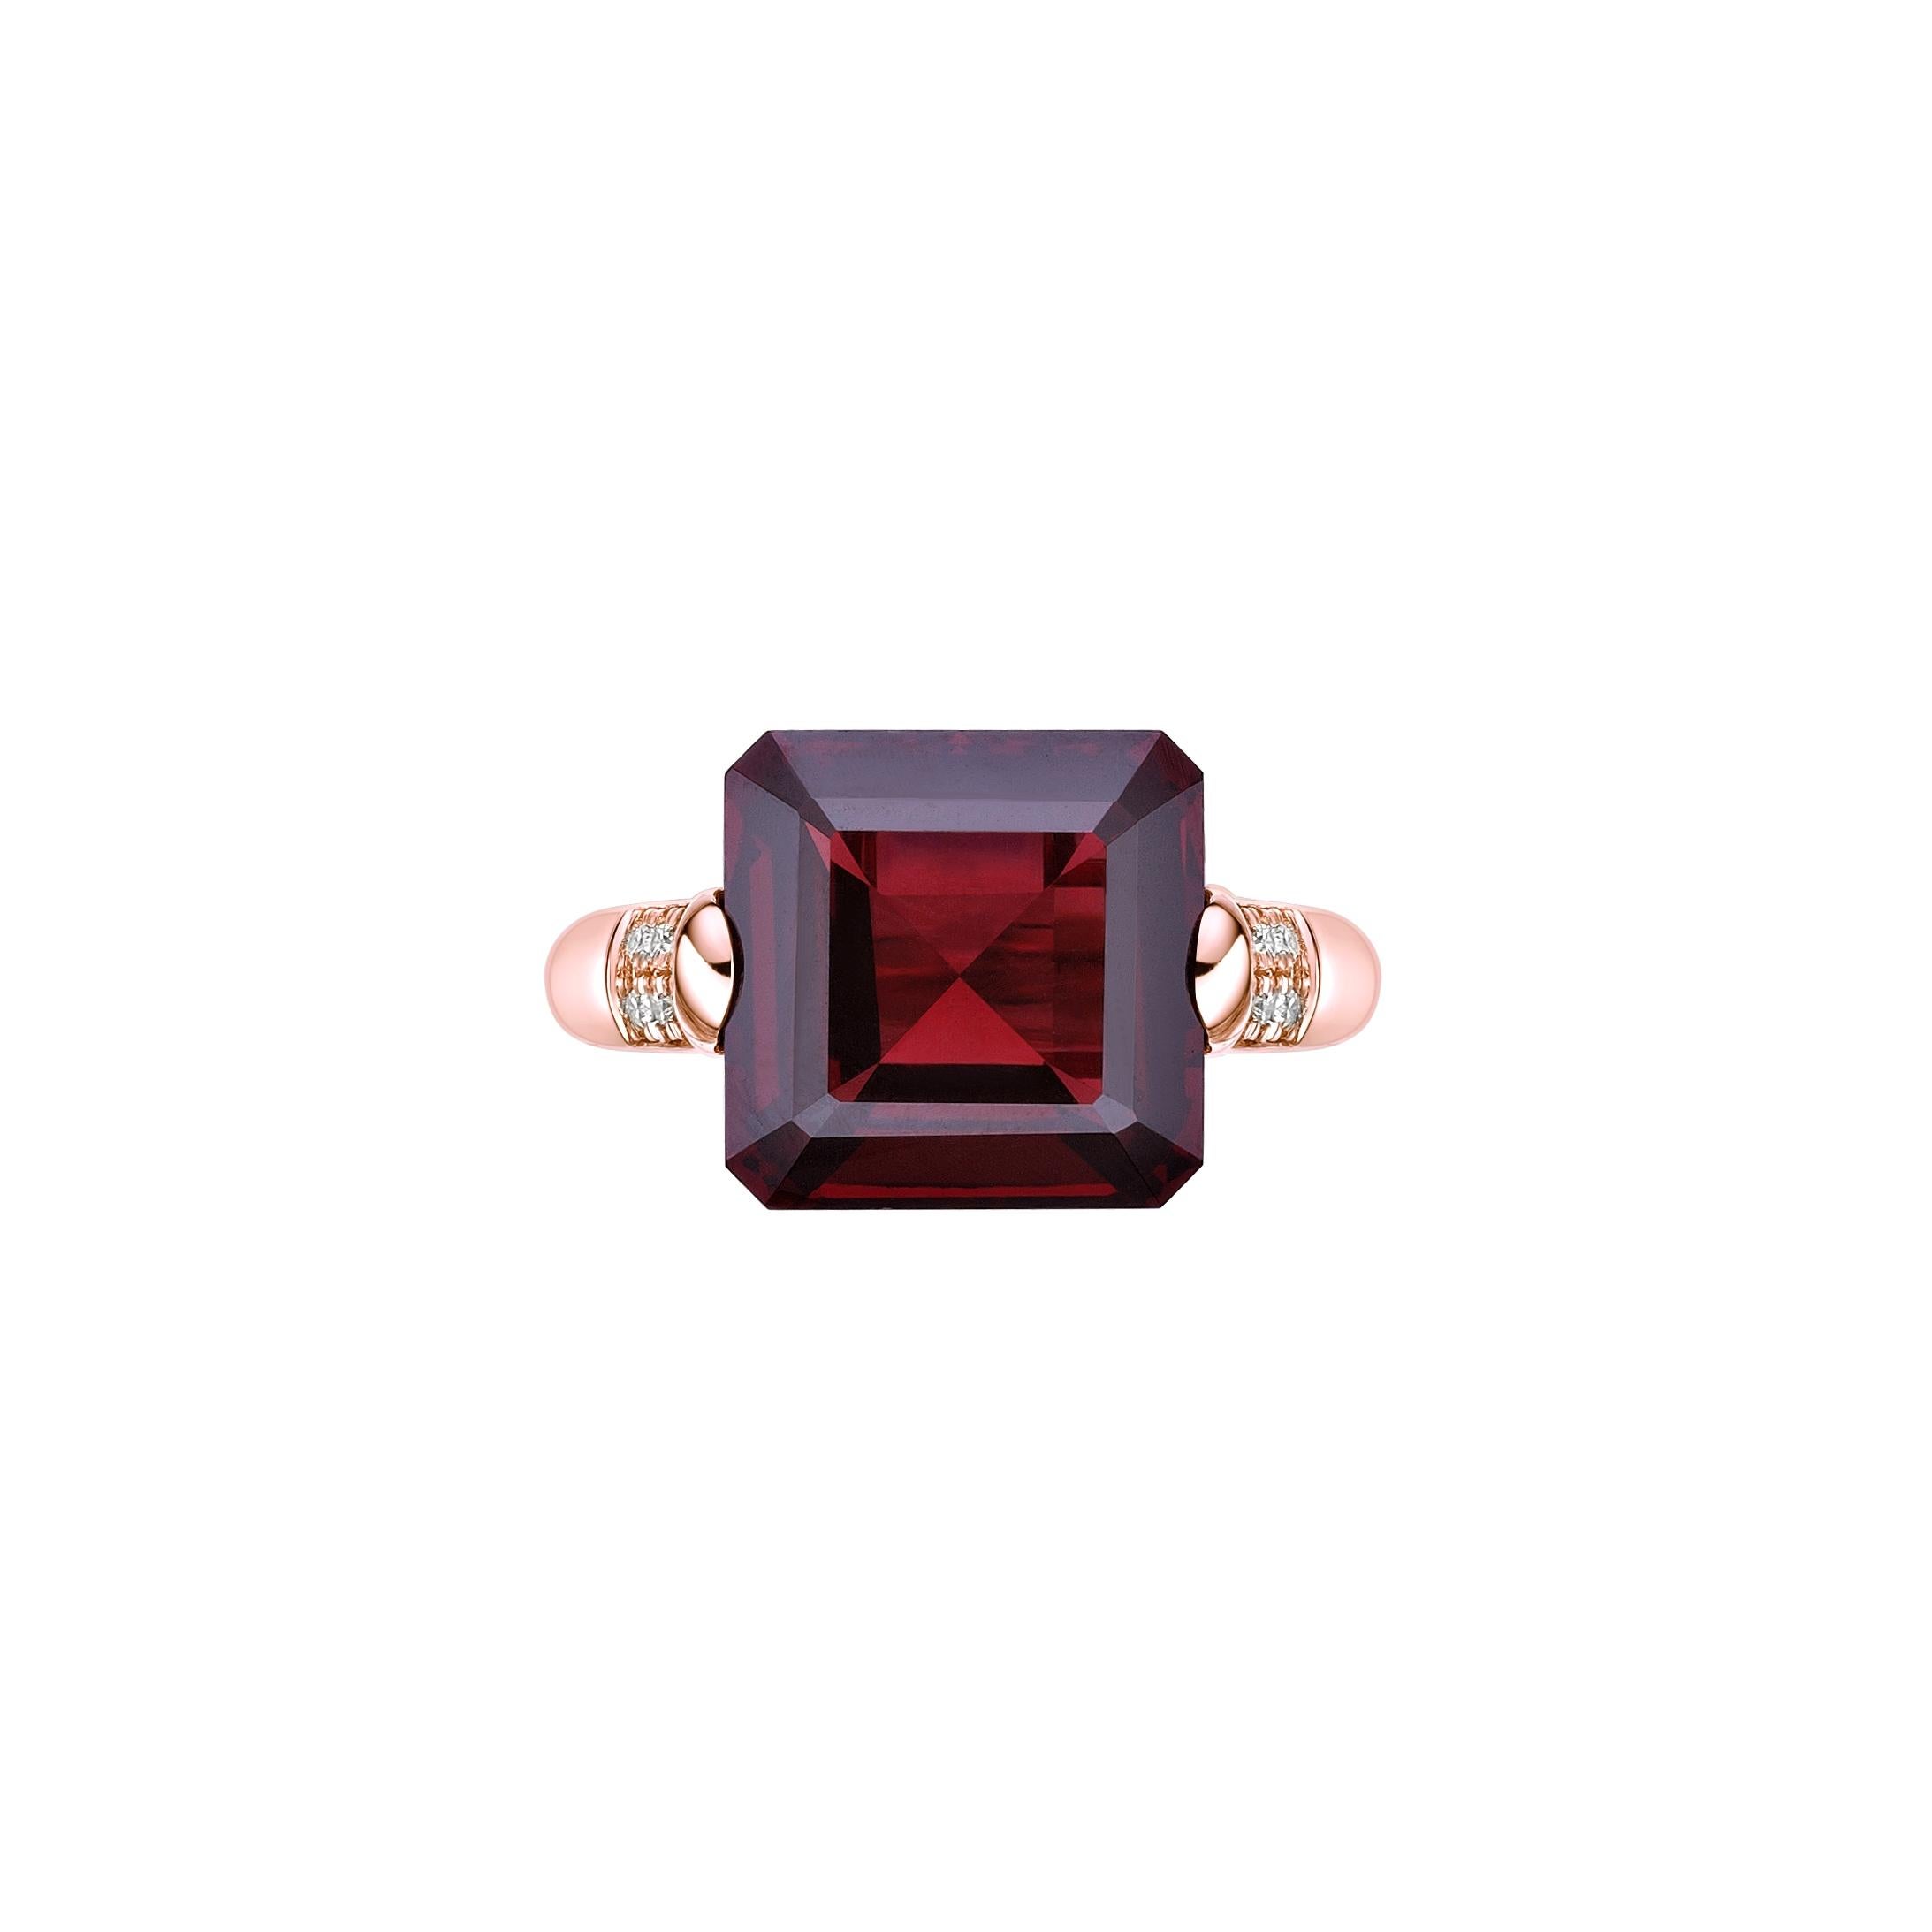 This is fancy Garnet Ring in Octagon shape purple hue. The Ring is elegant and can be worn for many occasions. The Garnet around the ring add to the beauty and elegance of the ring.
  
Red Garnet Fancy Ring in 18Karat Rose Gold with White